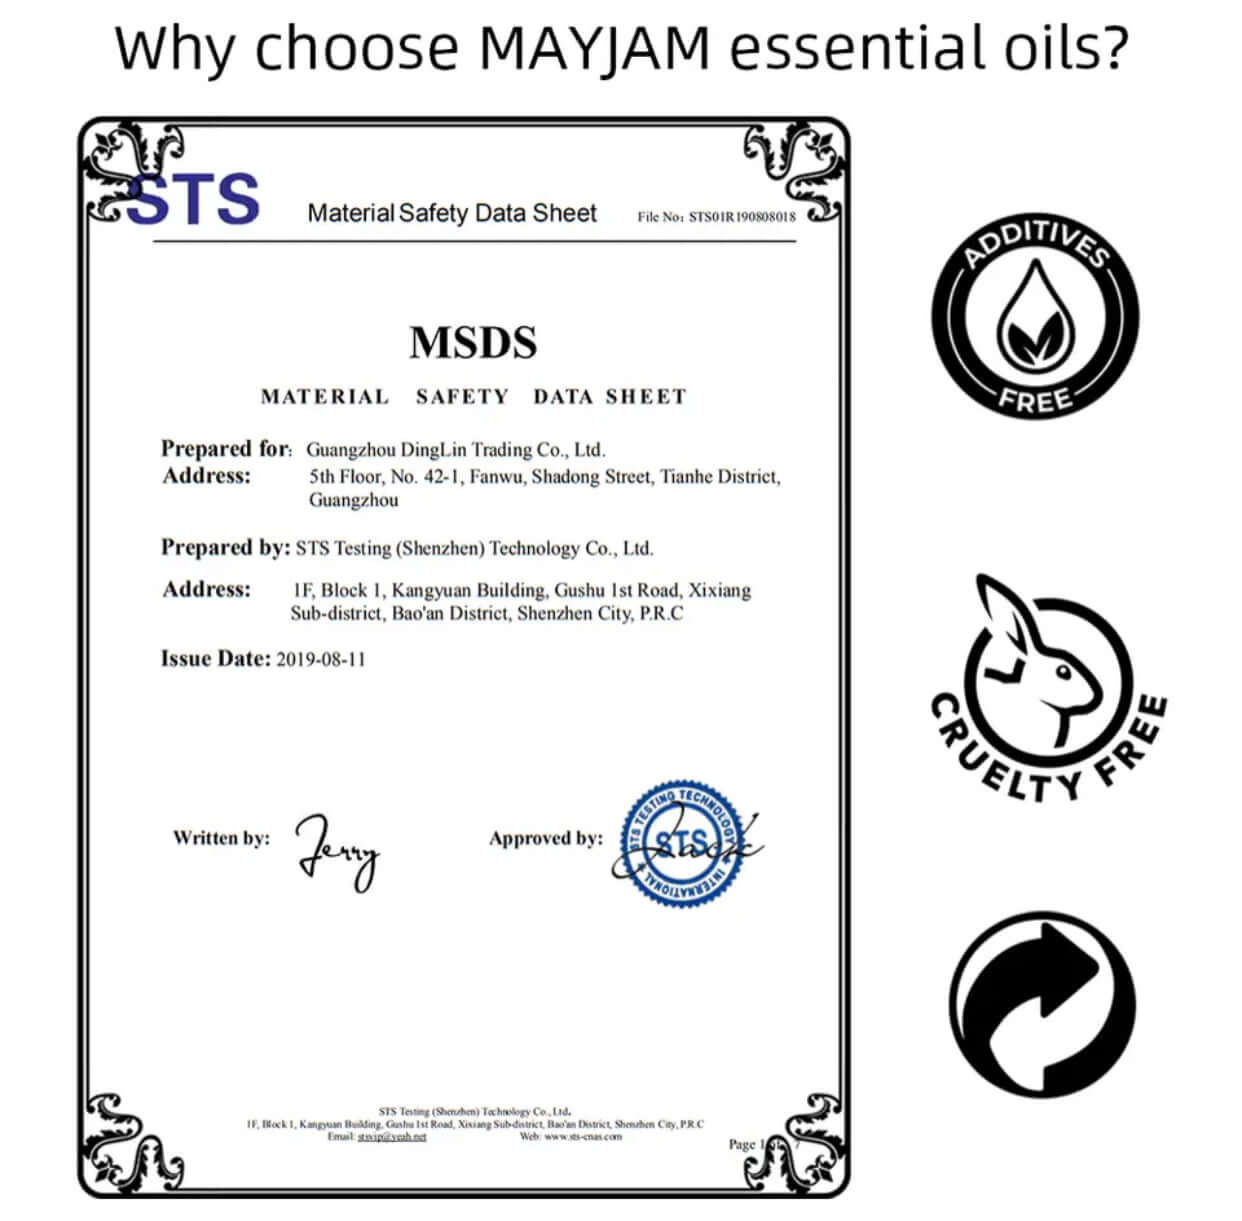 MAYJAM essential oil set - 35 bottles as a gift set - for humidifiers, diffusers, DIY perfume and much more